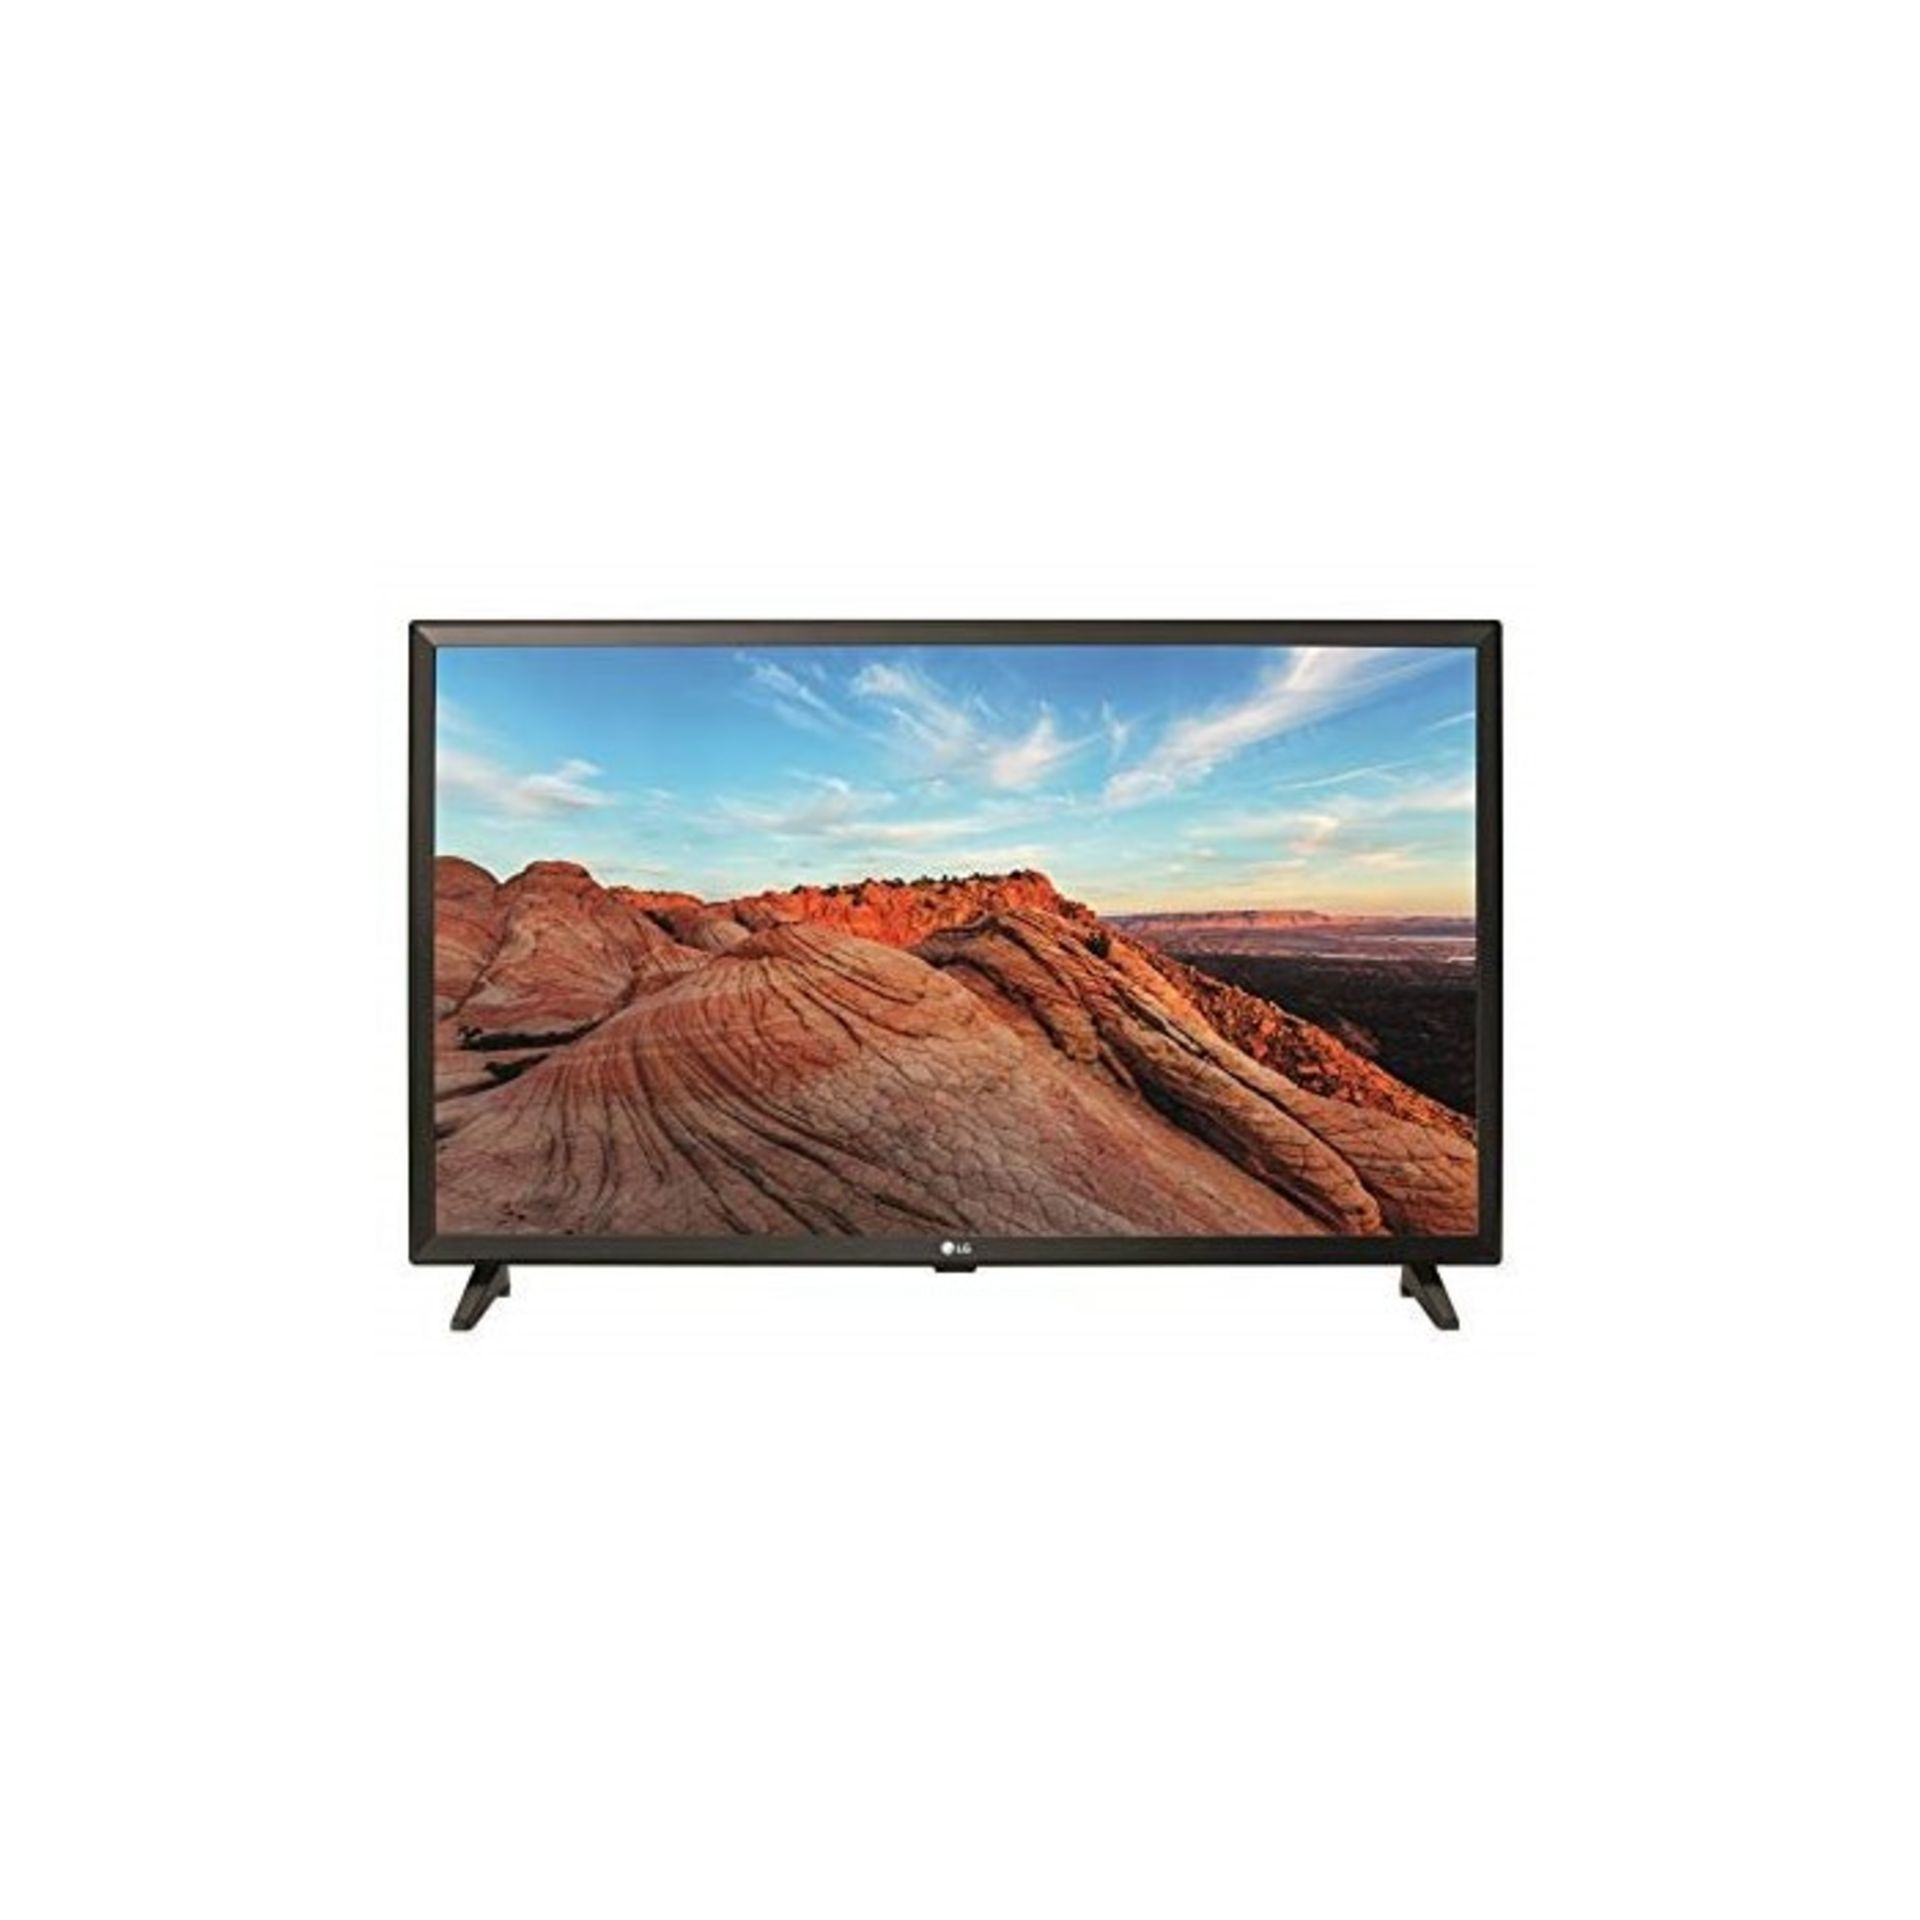 V Grade A LG 32 Inch HD READY LED TV WITH FREEVIEW HD32LK510BPLD